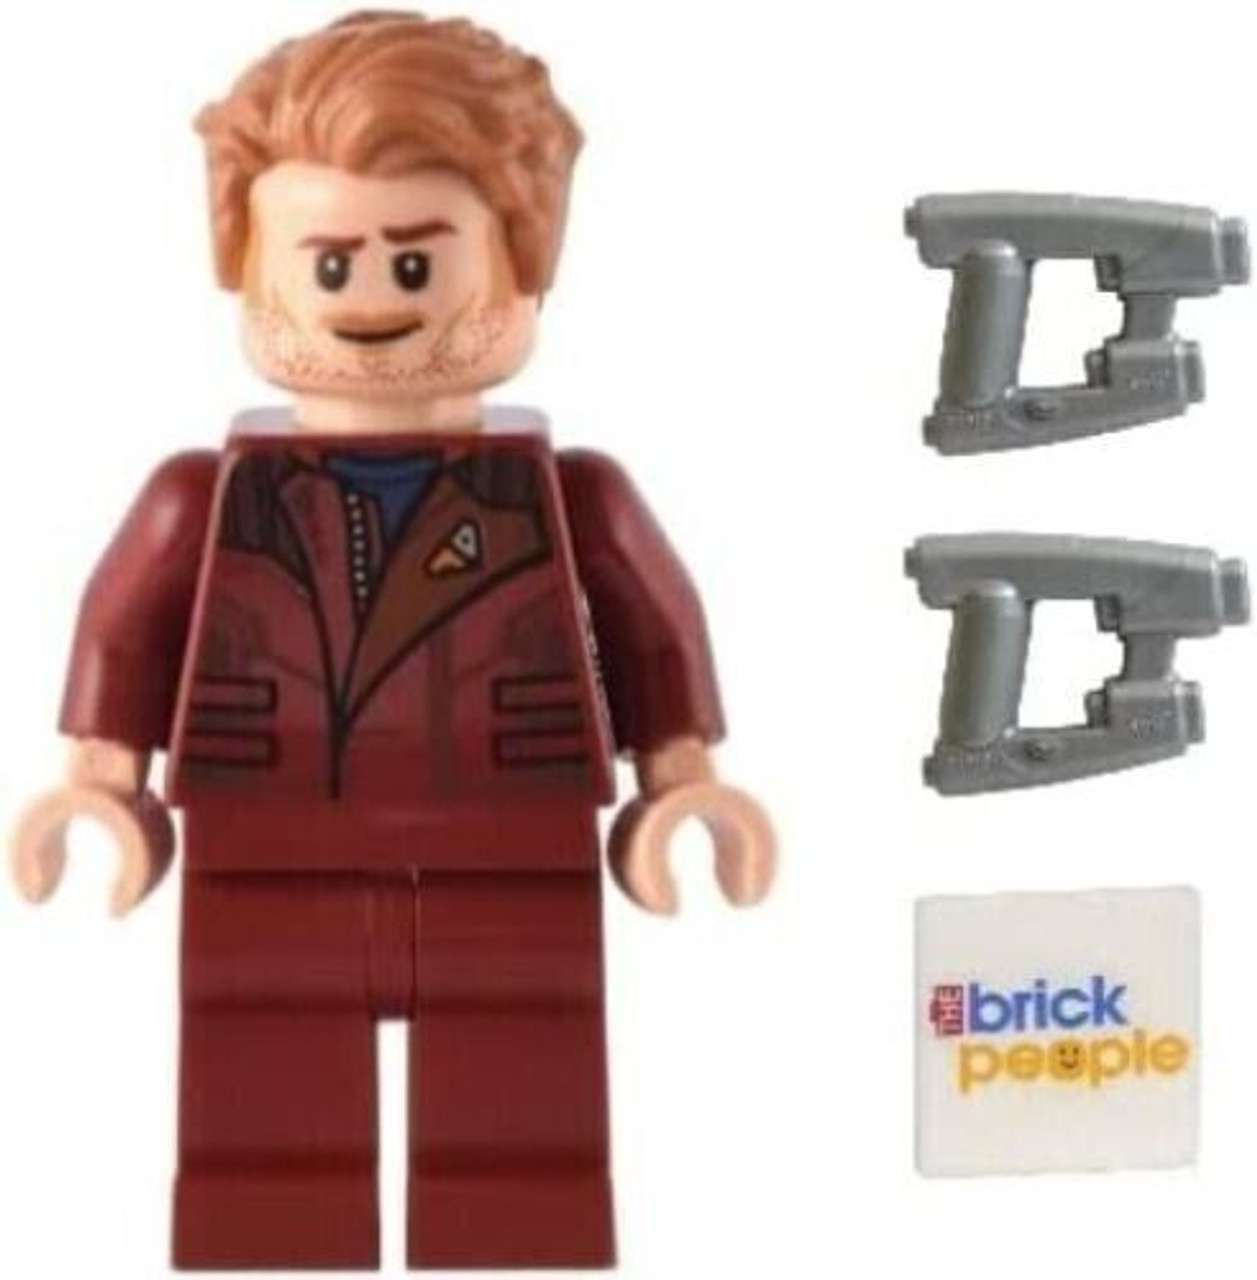 star lord guardians of the galaxy lego